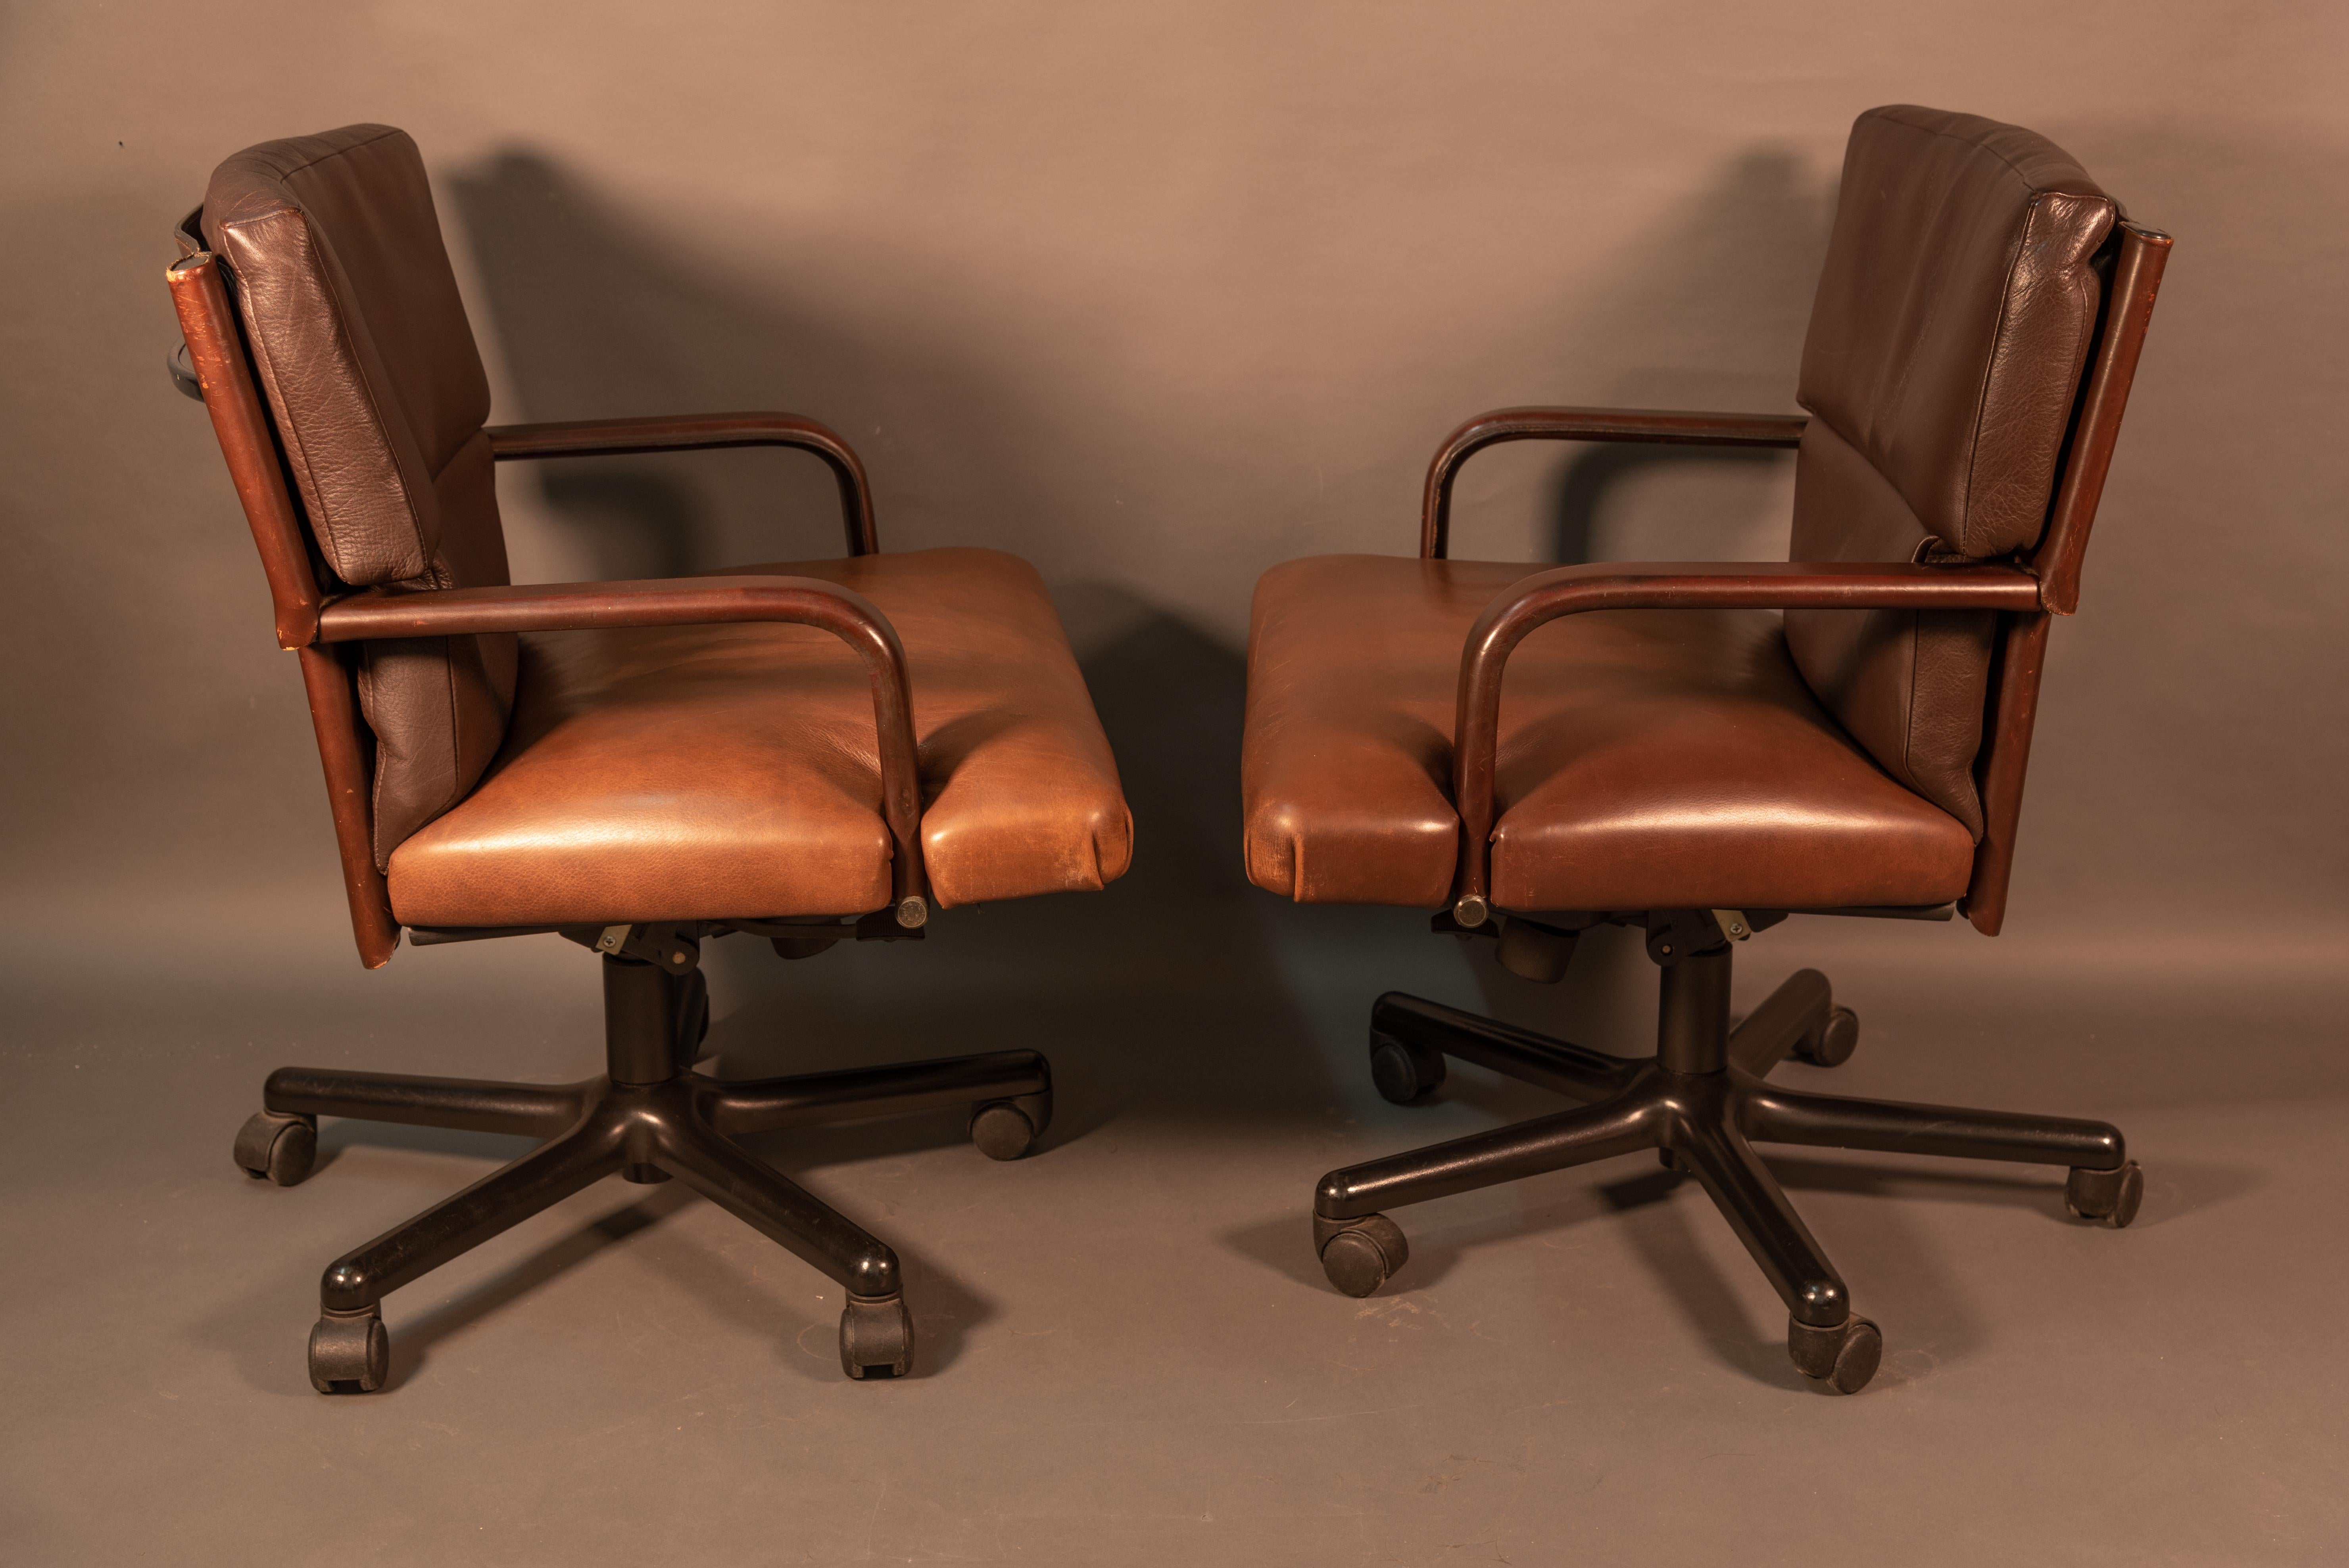 Pair of Matteo Grassi armchairs. The armrests are covered in leather.
There's a mechanism under the seat with two levers to adjust the seat height. 
The five swivel wheels are completely black polyamide, suitable for soft floors. 
They have a